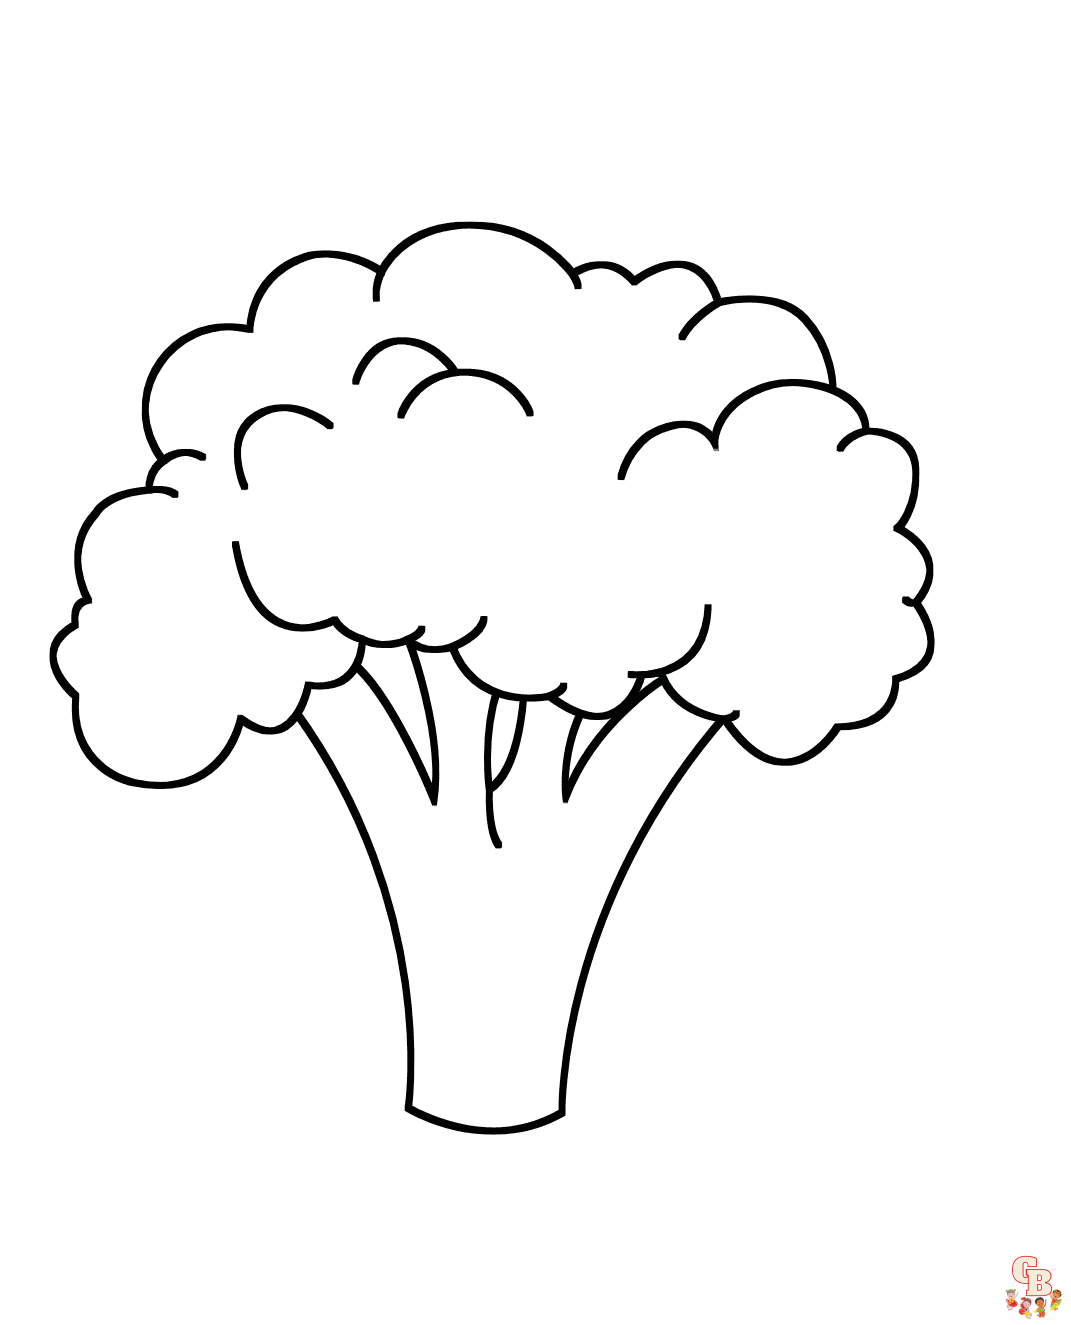 Broccoli coloring pages free